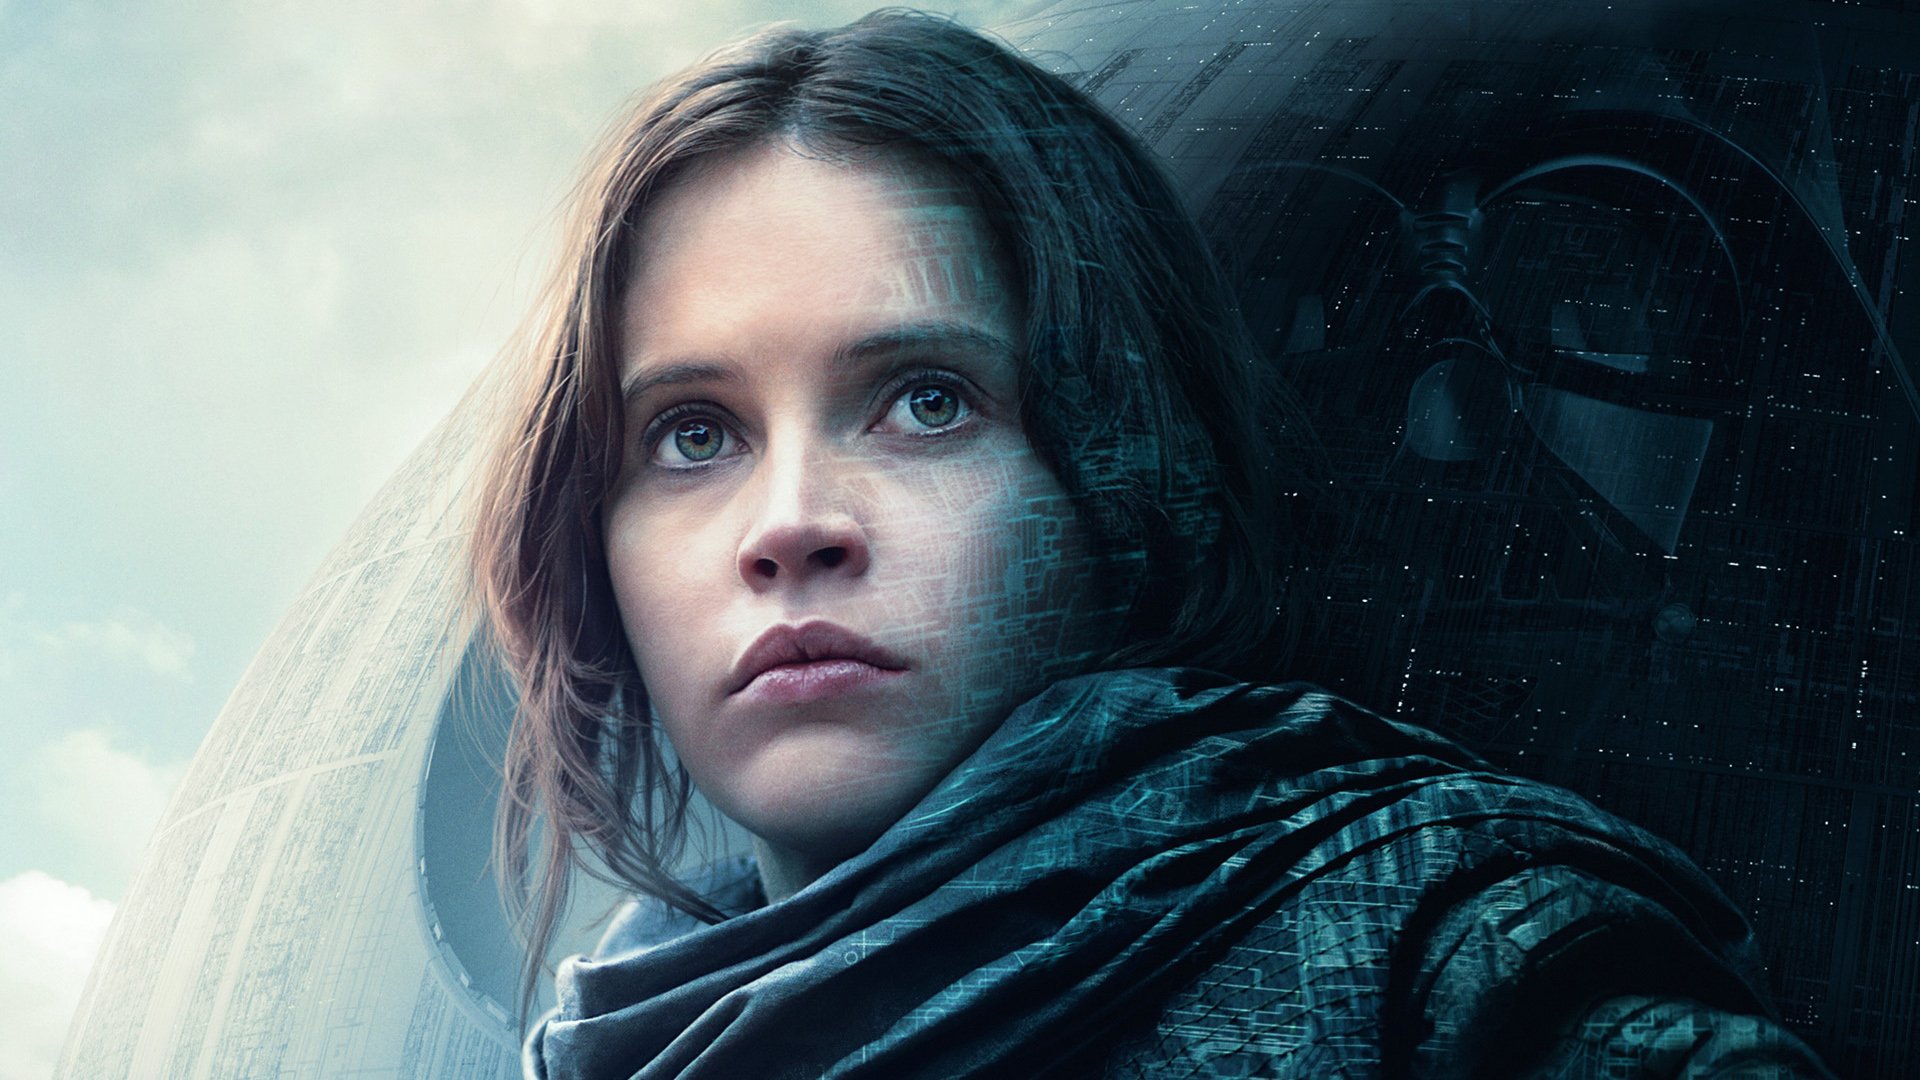 32 Jyn Erso Hd Wallpapers Background Images Wallpaper Abyss Images, Photos, Reviews